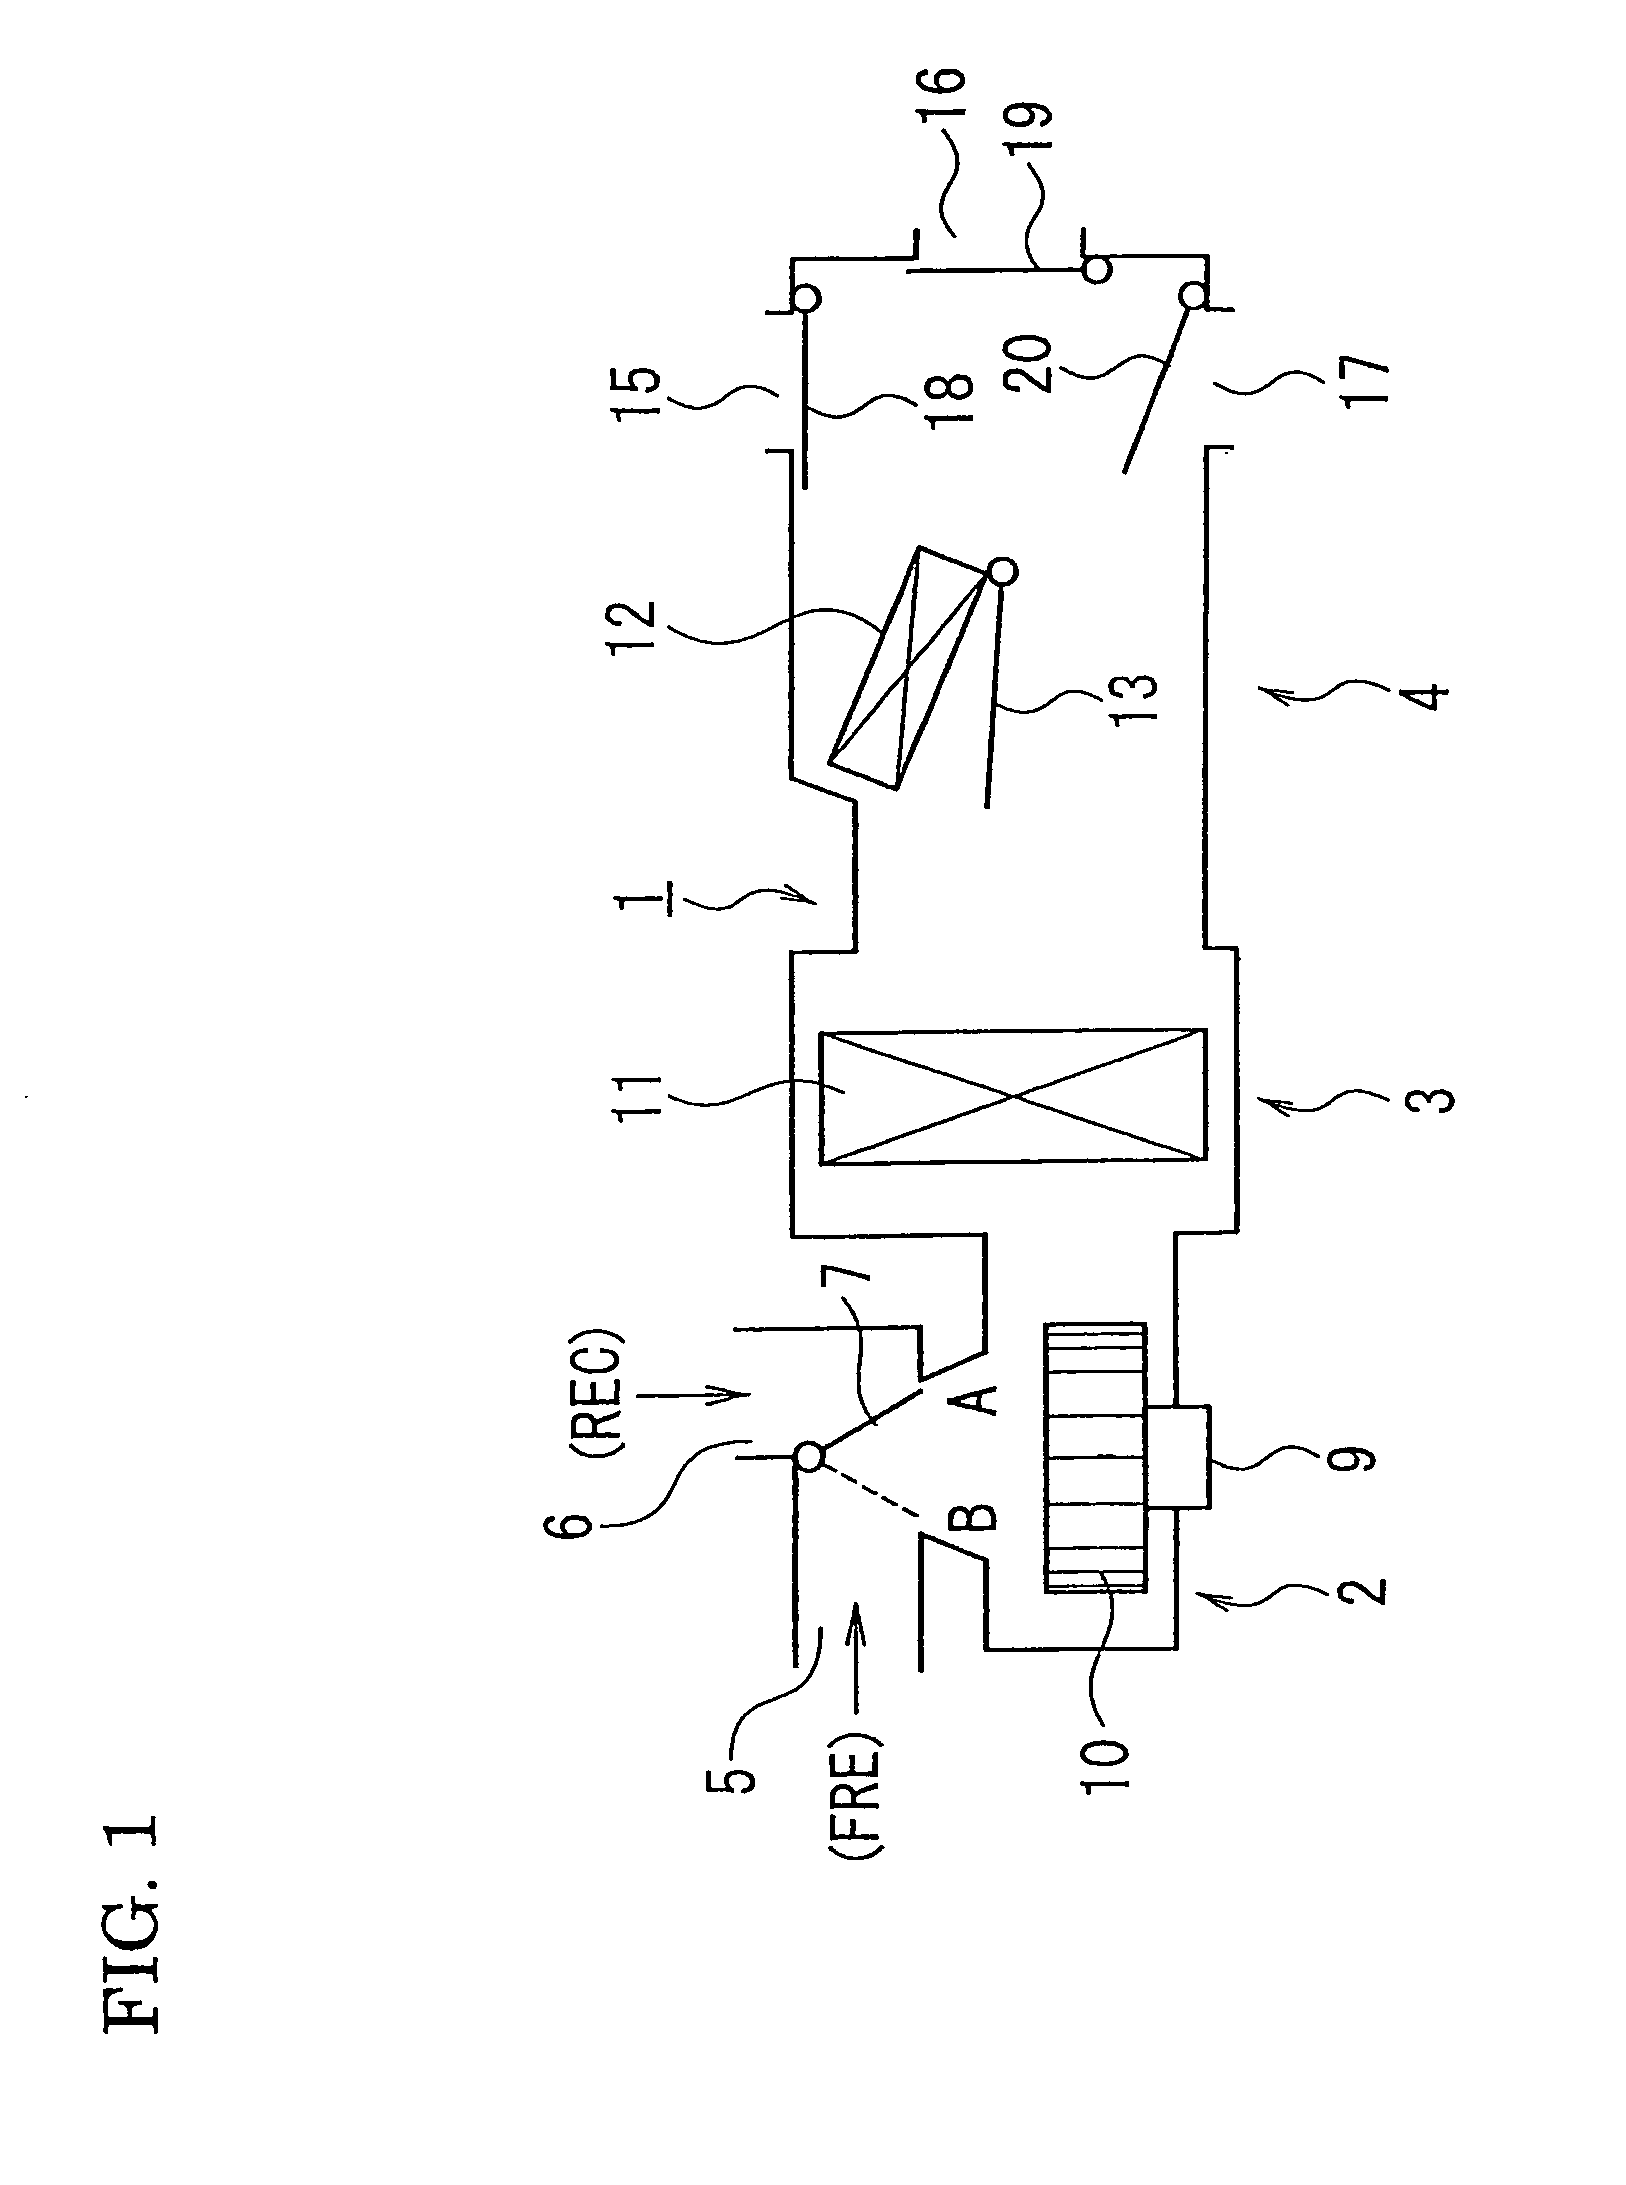 Driving control device for actuator